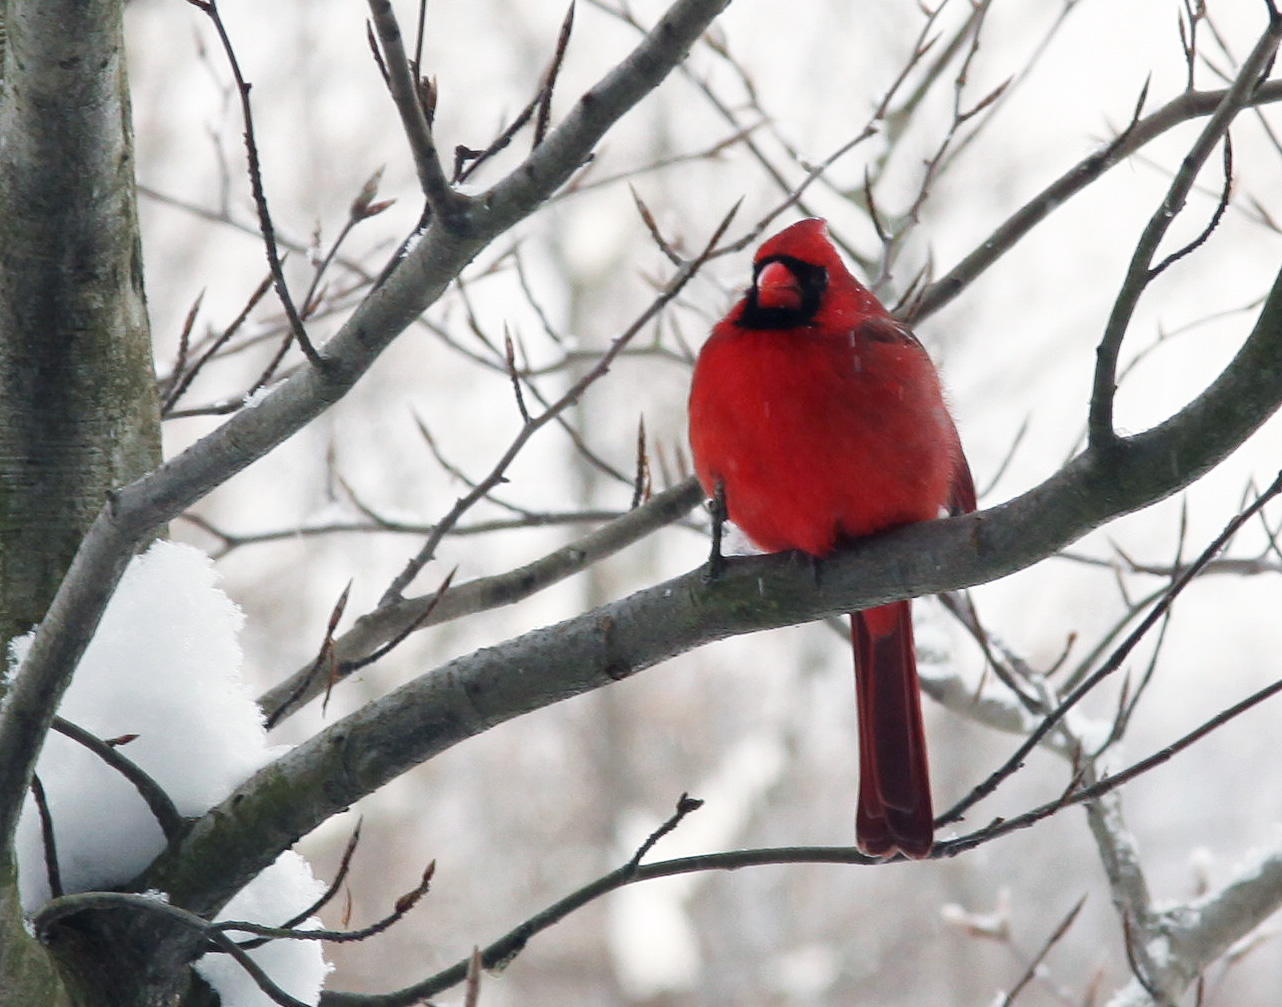 Click to Enlarge - Cardinal - Crop from 100% image